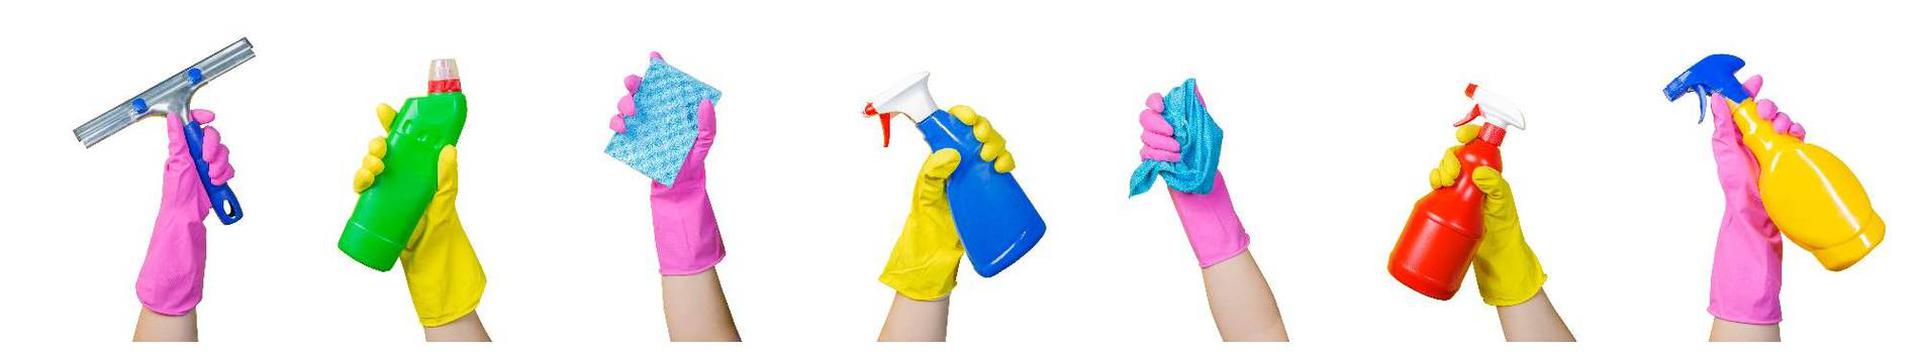 pressure washing and equipment, General and home services